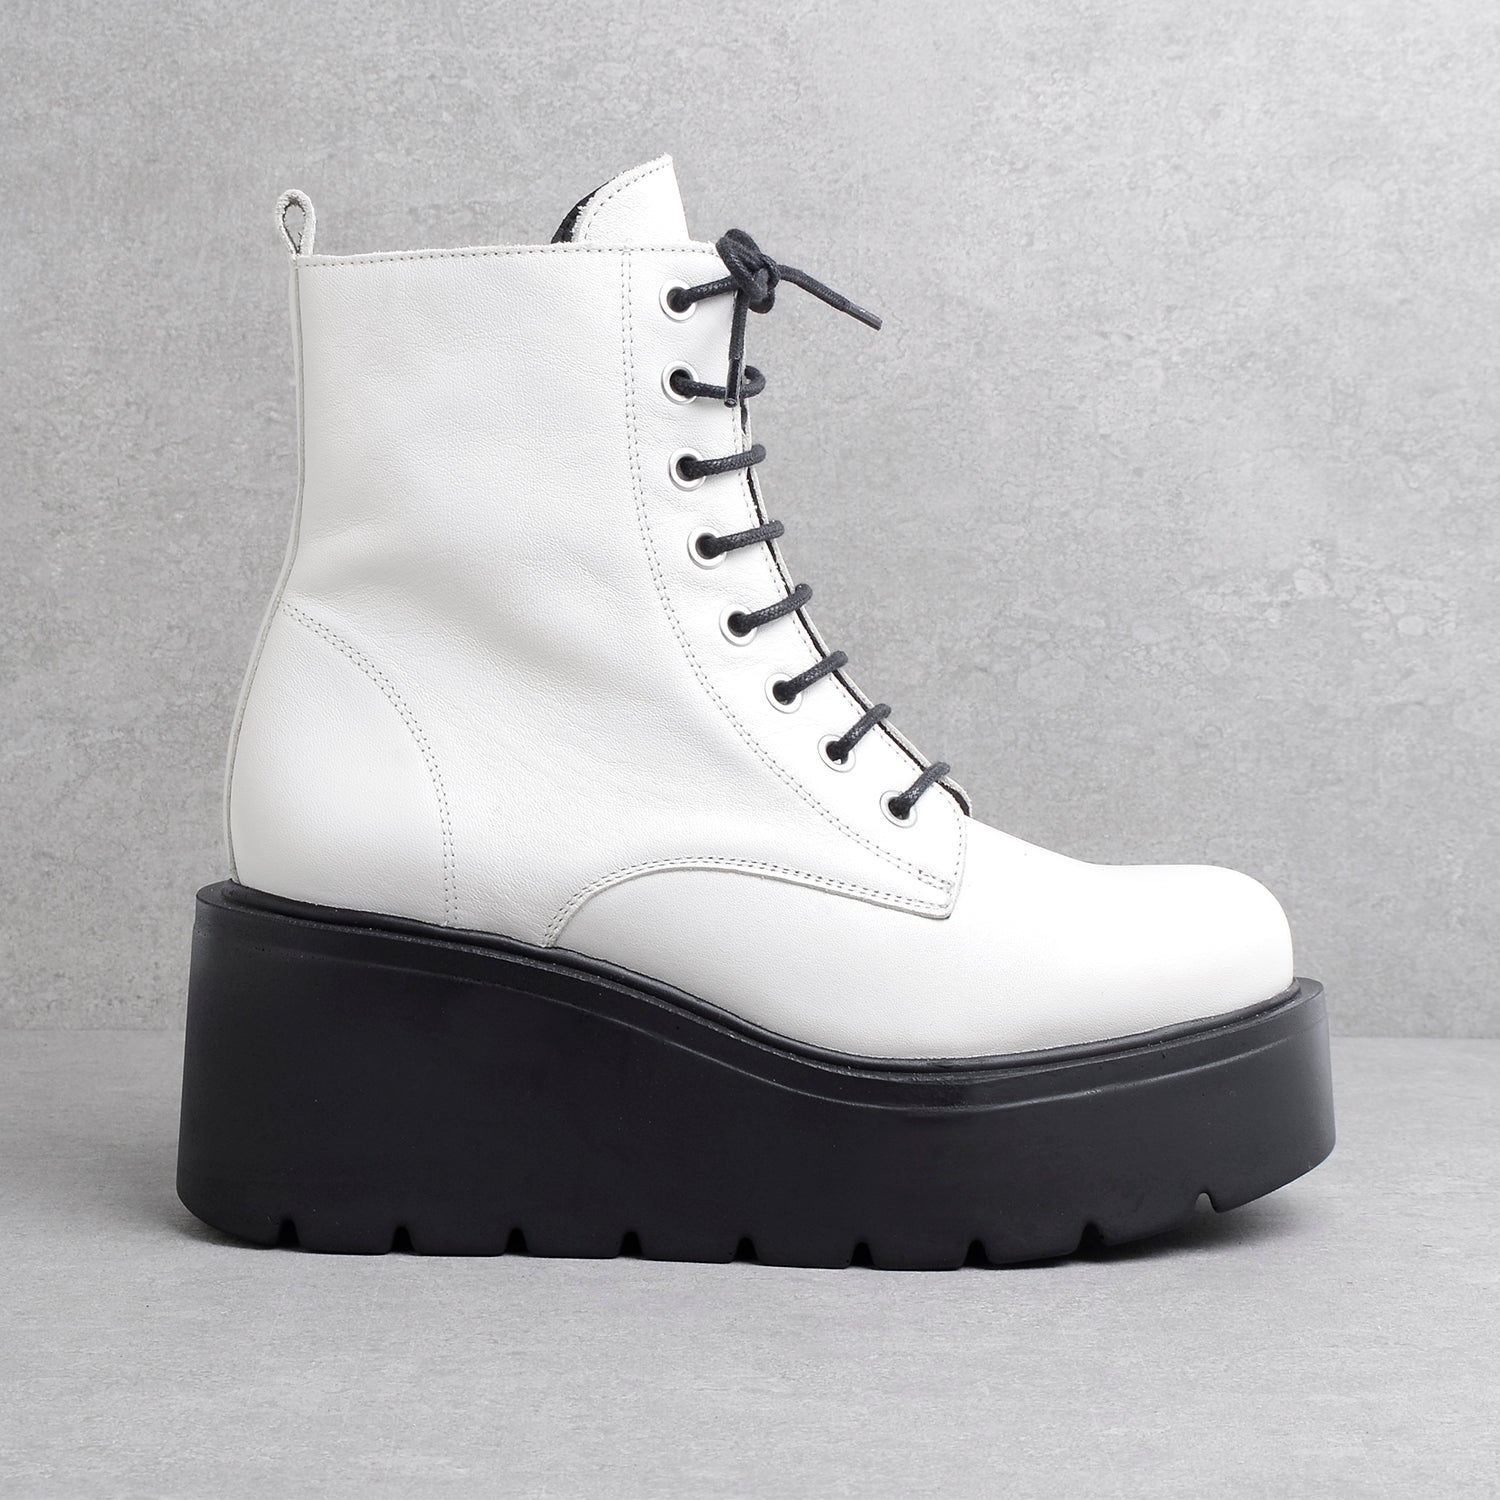 Kassel Off White KMB shoes